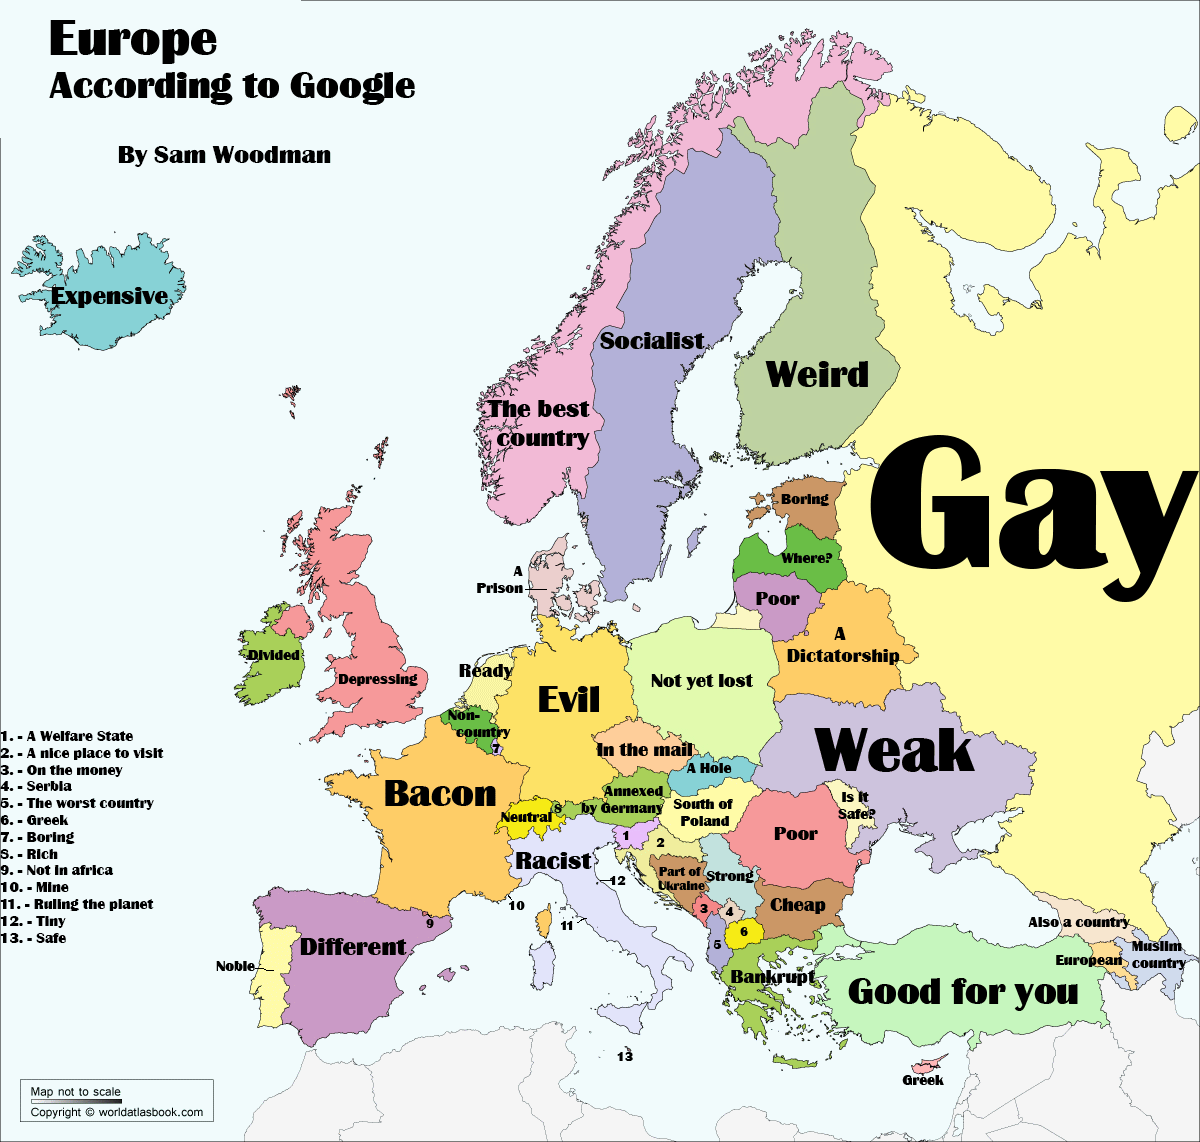 Funny Europe According To Google Map Image